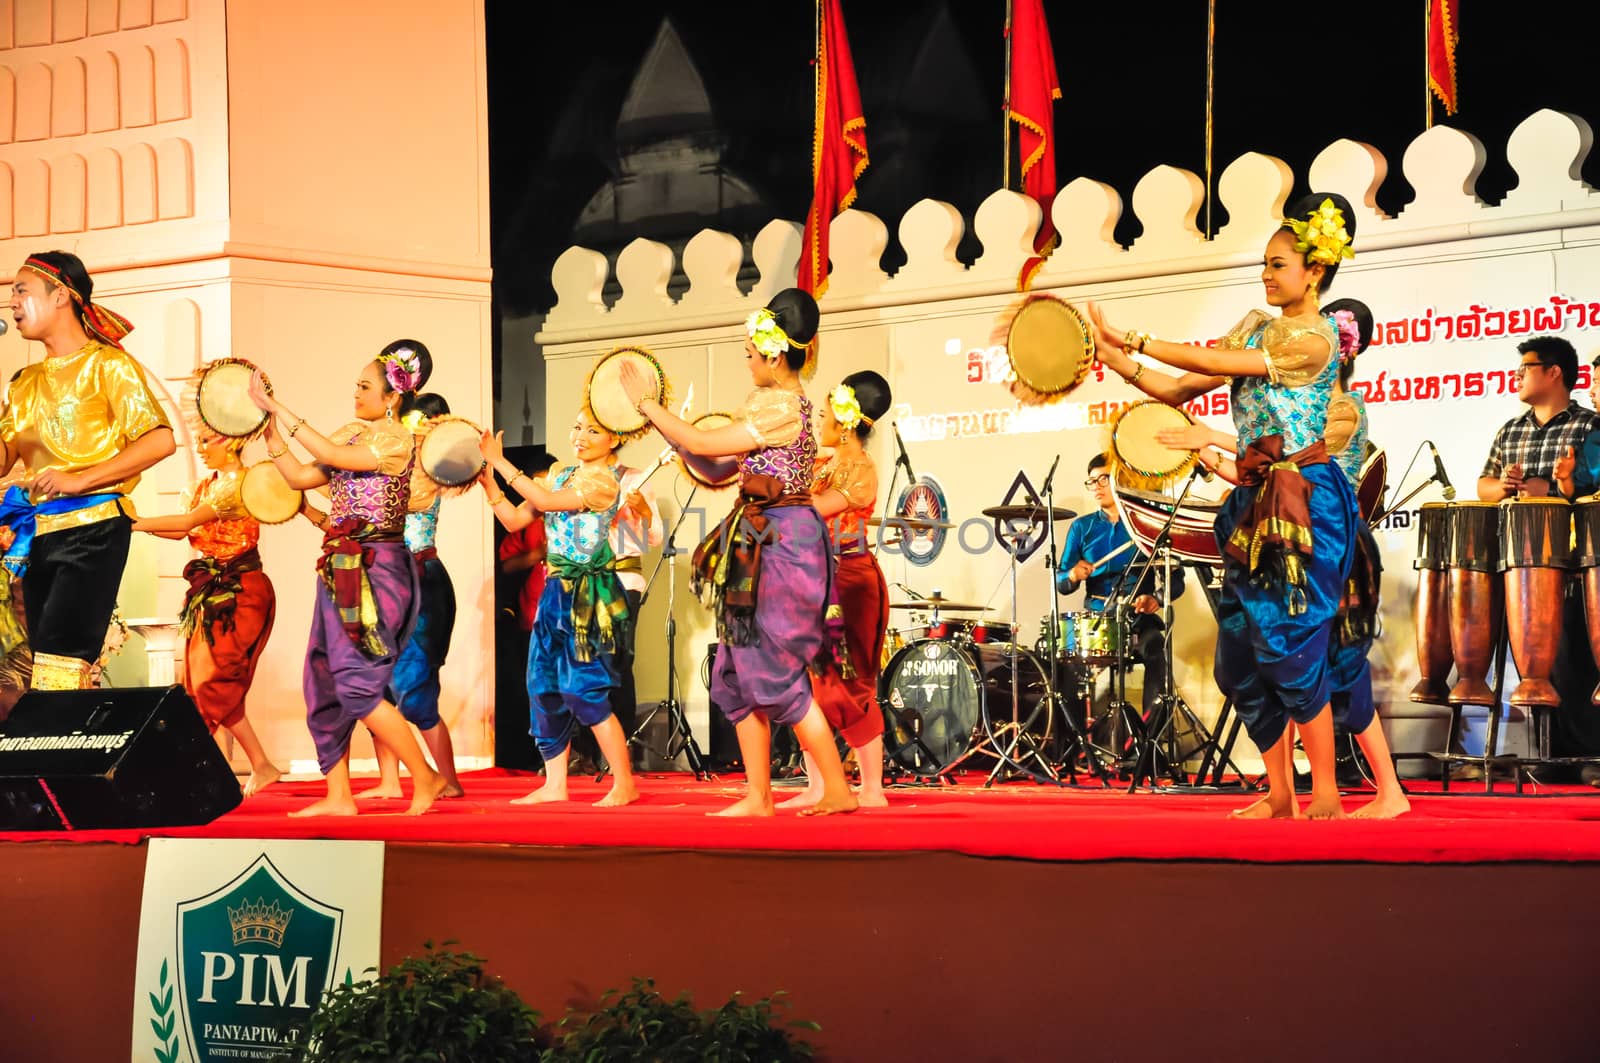 Lopburi, Thailand.- February 21, 2014 : The cultural drum dance show in the event King Narai Reign Fair 2014, take place in the Narai Ratchaniwet,on February 21, 2014 in Lopburi, Thailand.